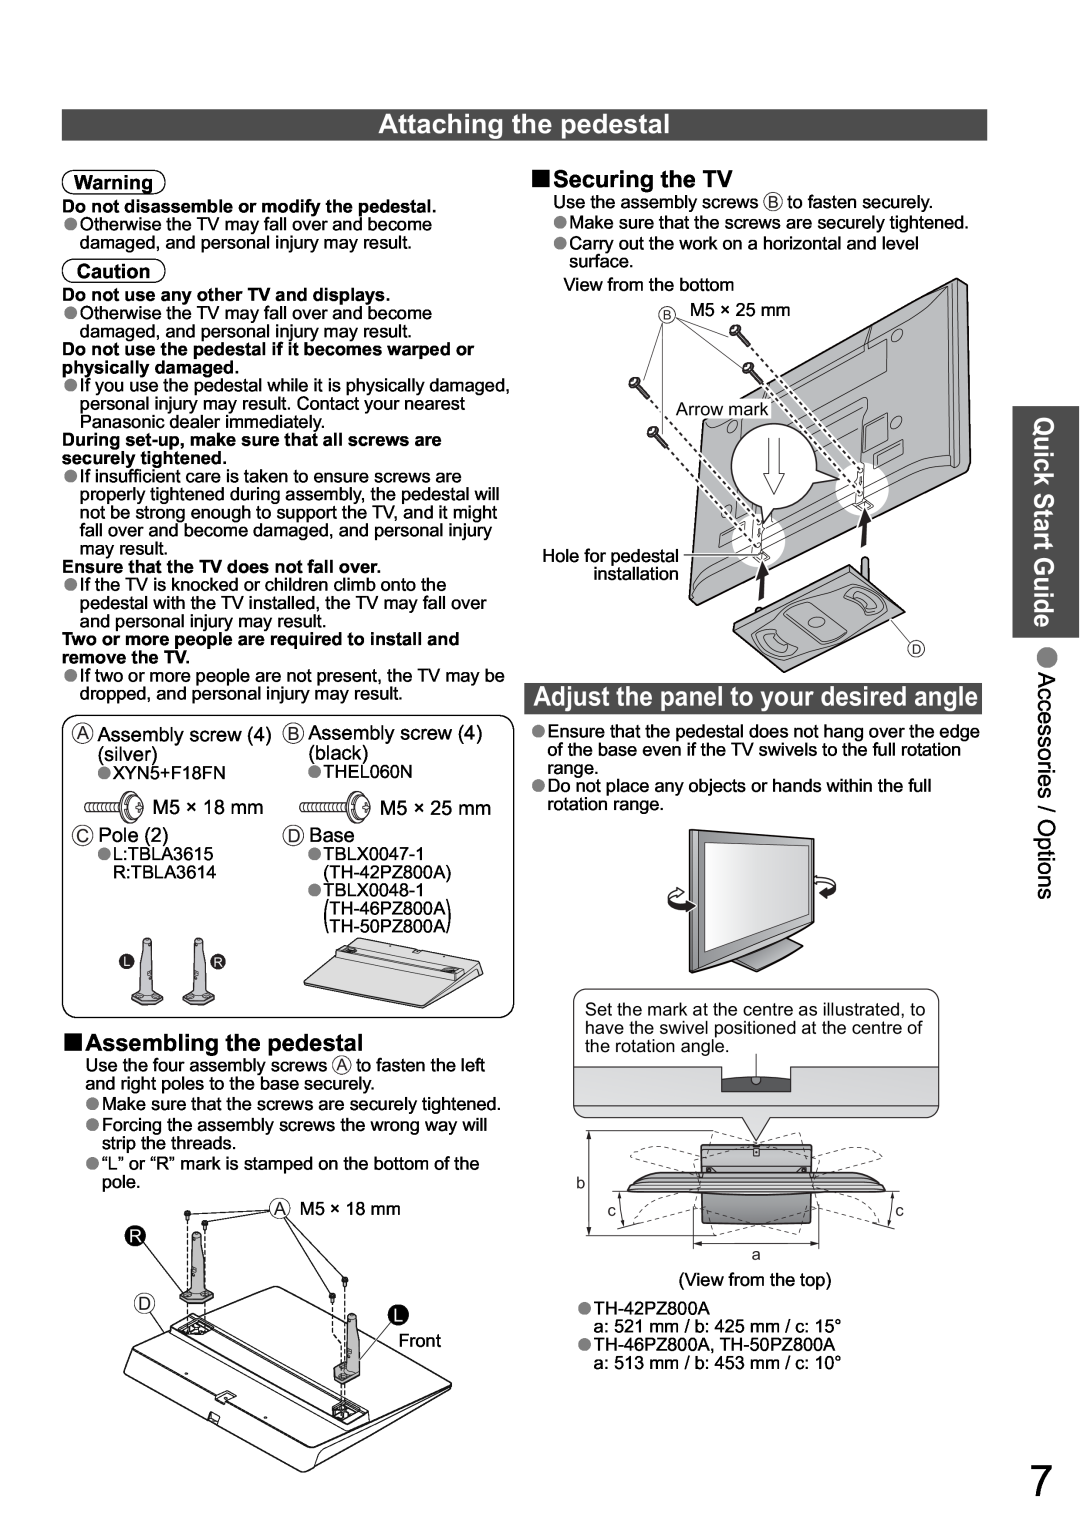 Panasonic TH-42PZ800A Attaching the pedestal, Adjust the panel to your desired angle, ŶSecuring the TV, Assembly screw 